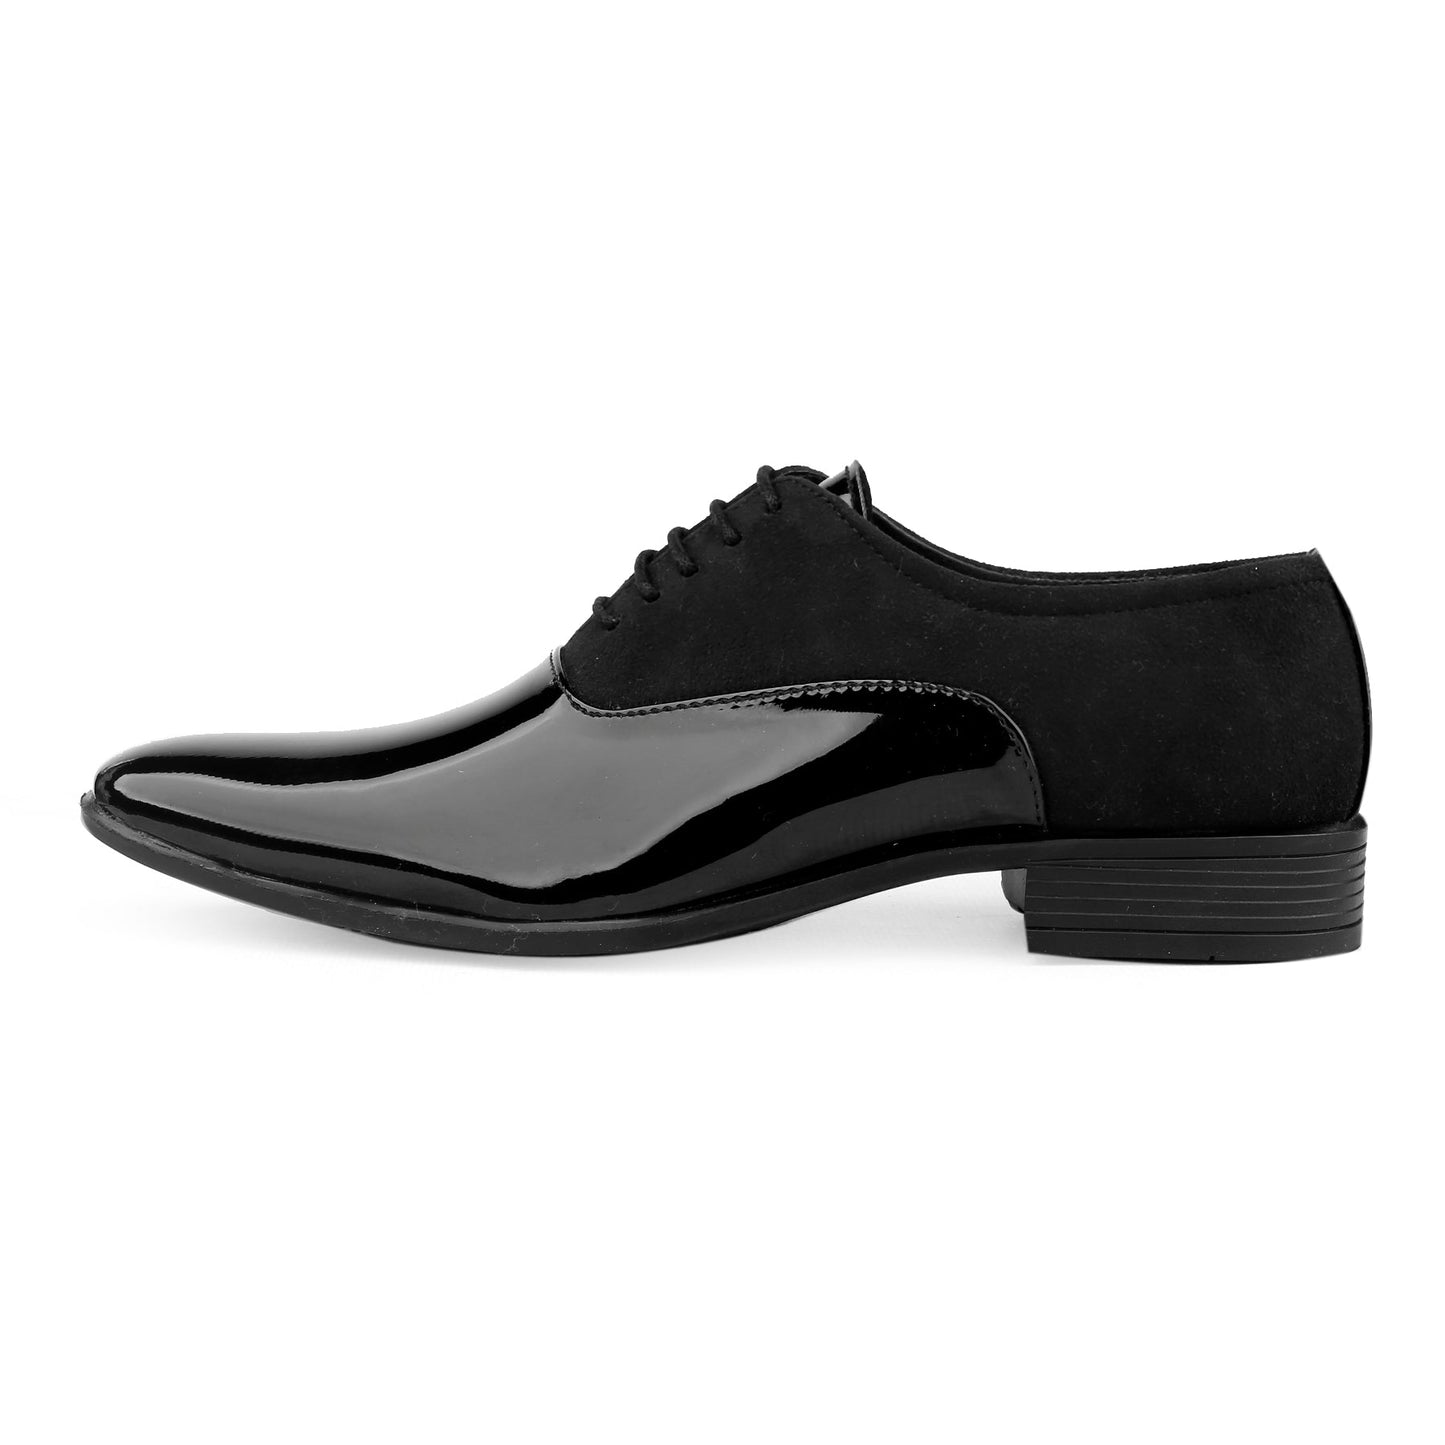 Men's Party Wear And Semi Formal Lace-up Shoes For All Seasons